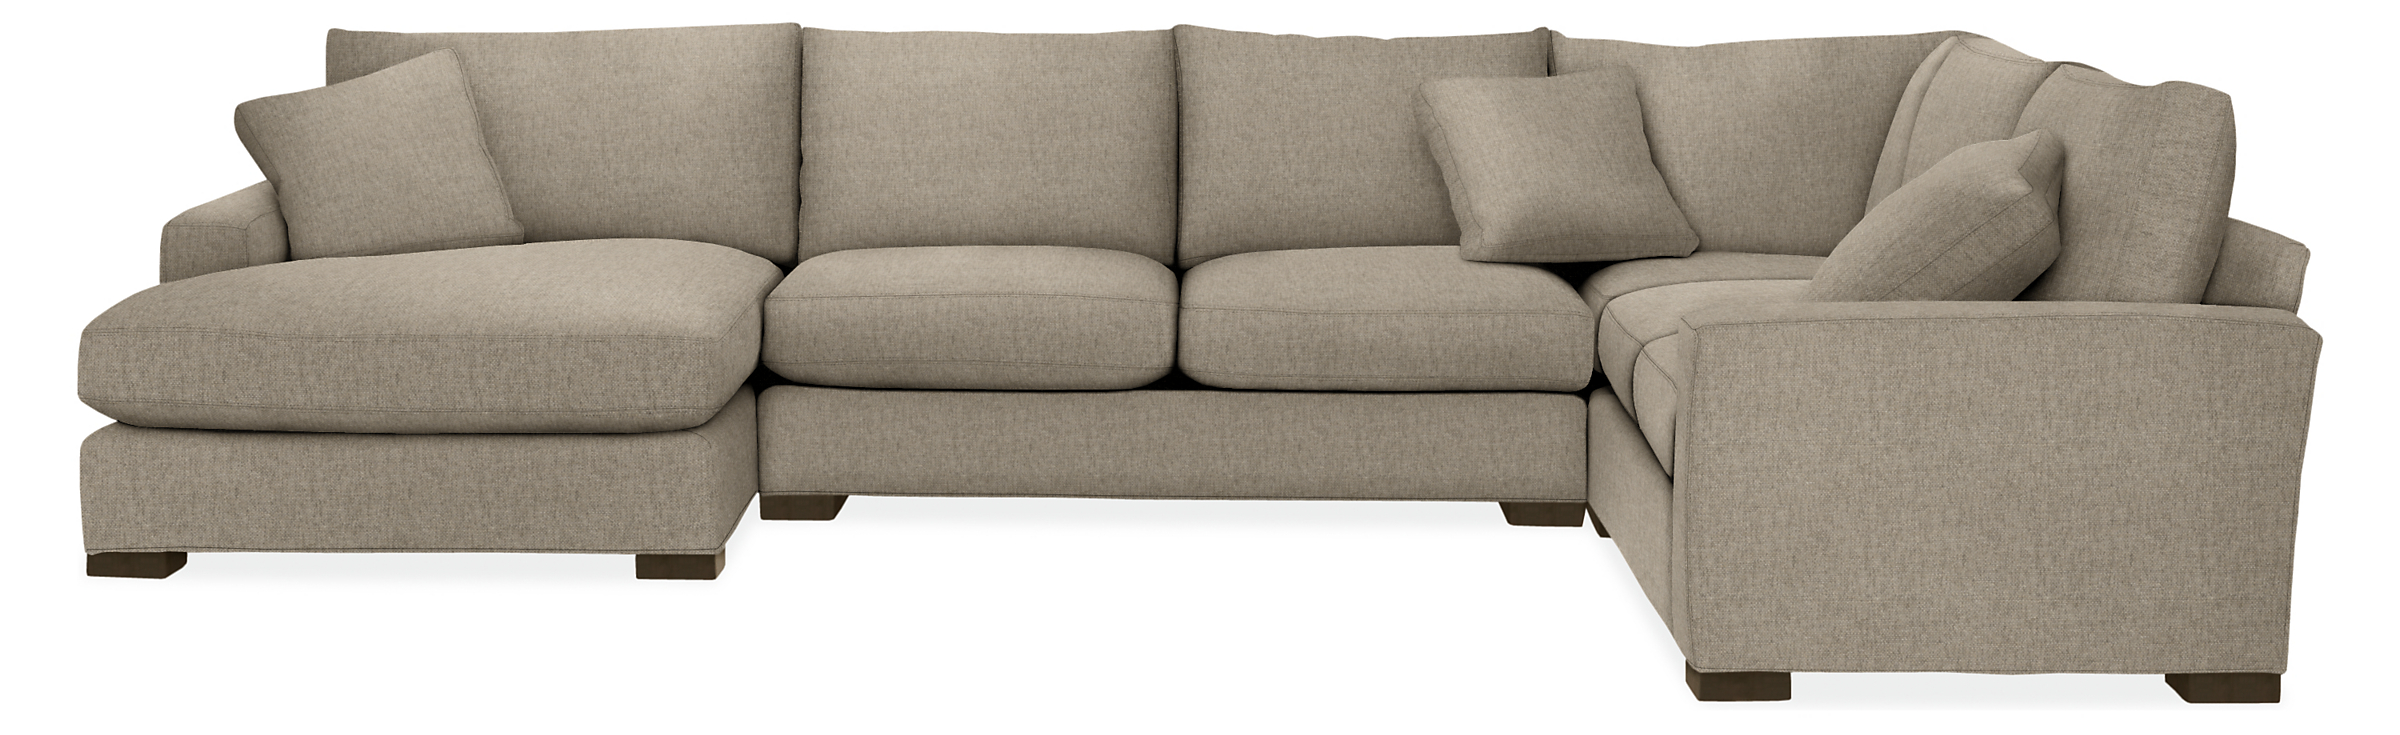 Metro 146x113" Four-Piece Sectional with Left-Arm Chaise